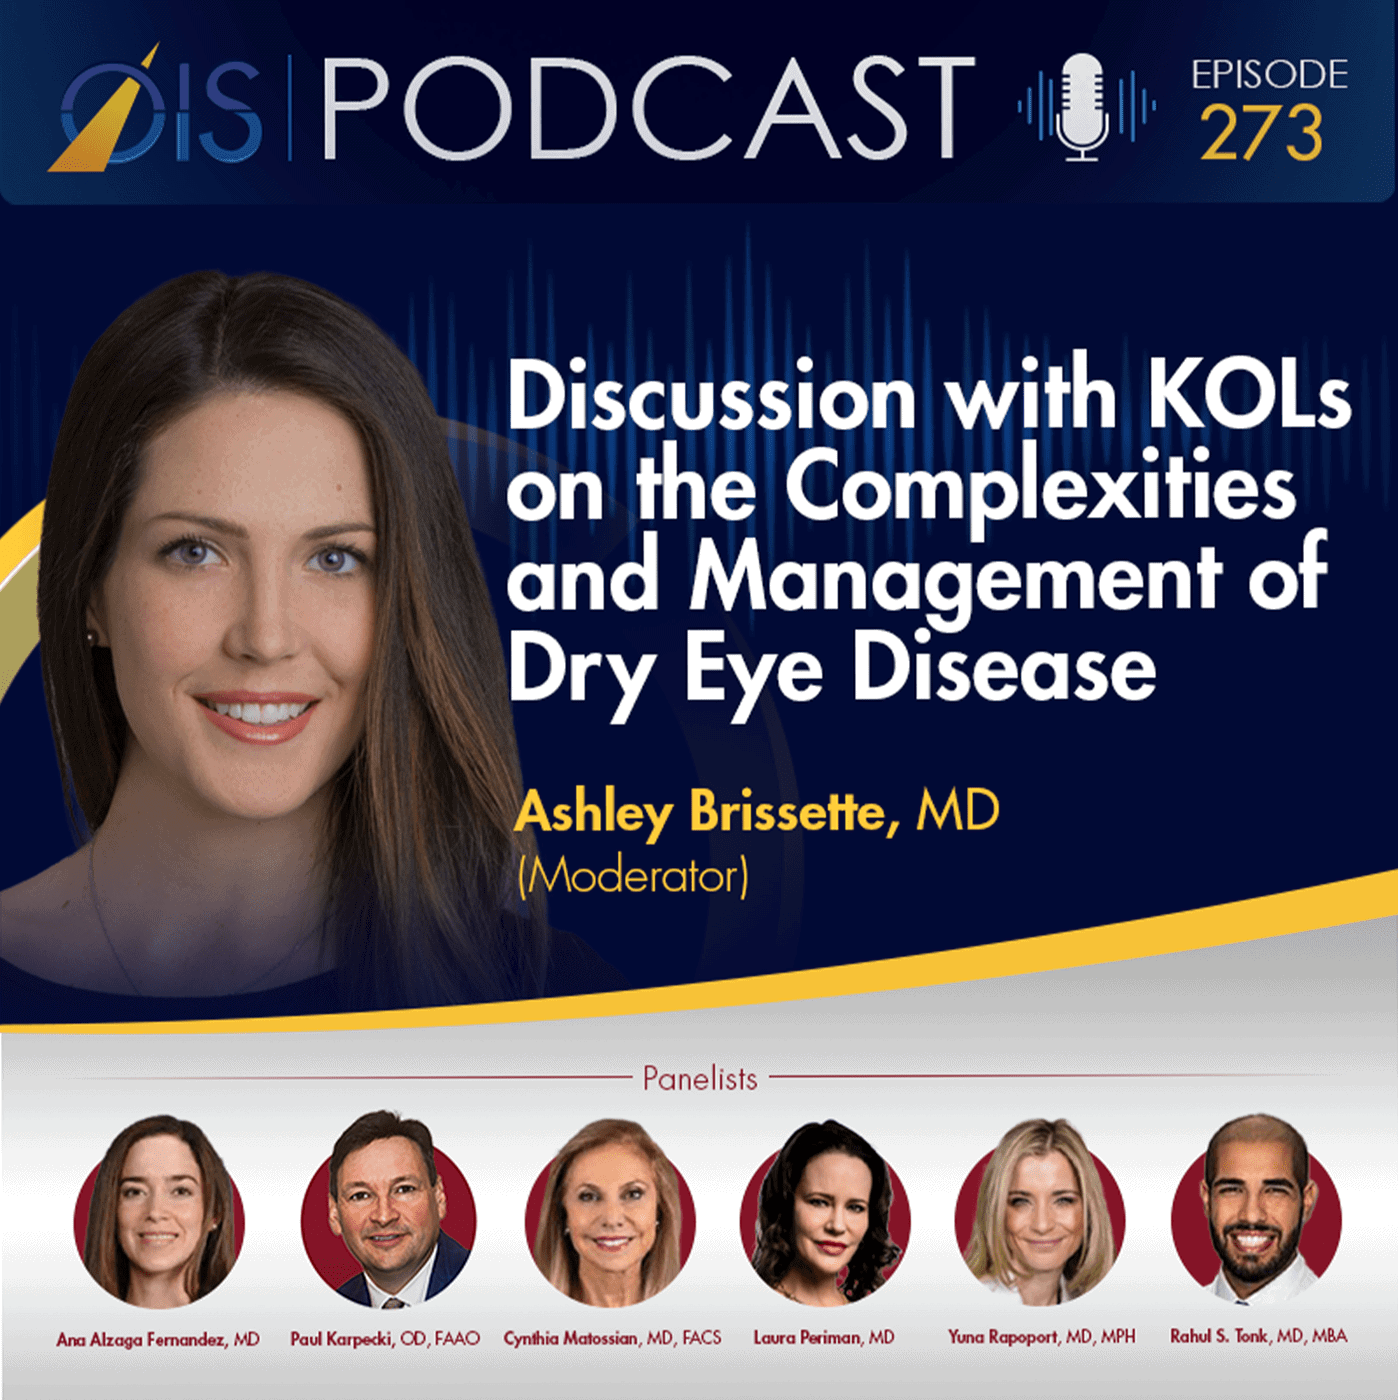 OIS PODCAST 273 [ Dry Eye Clinical Perspective] Thumbnail (1) OIS